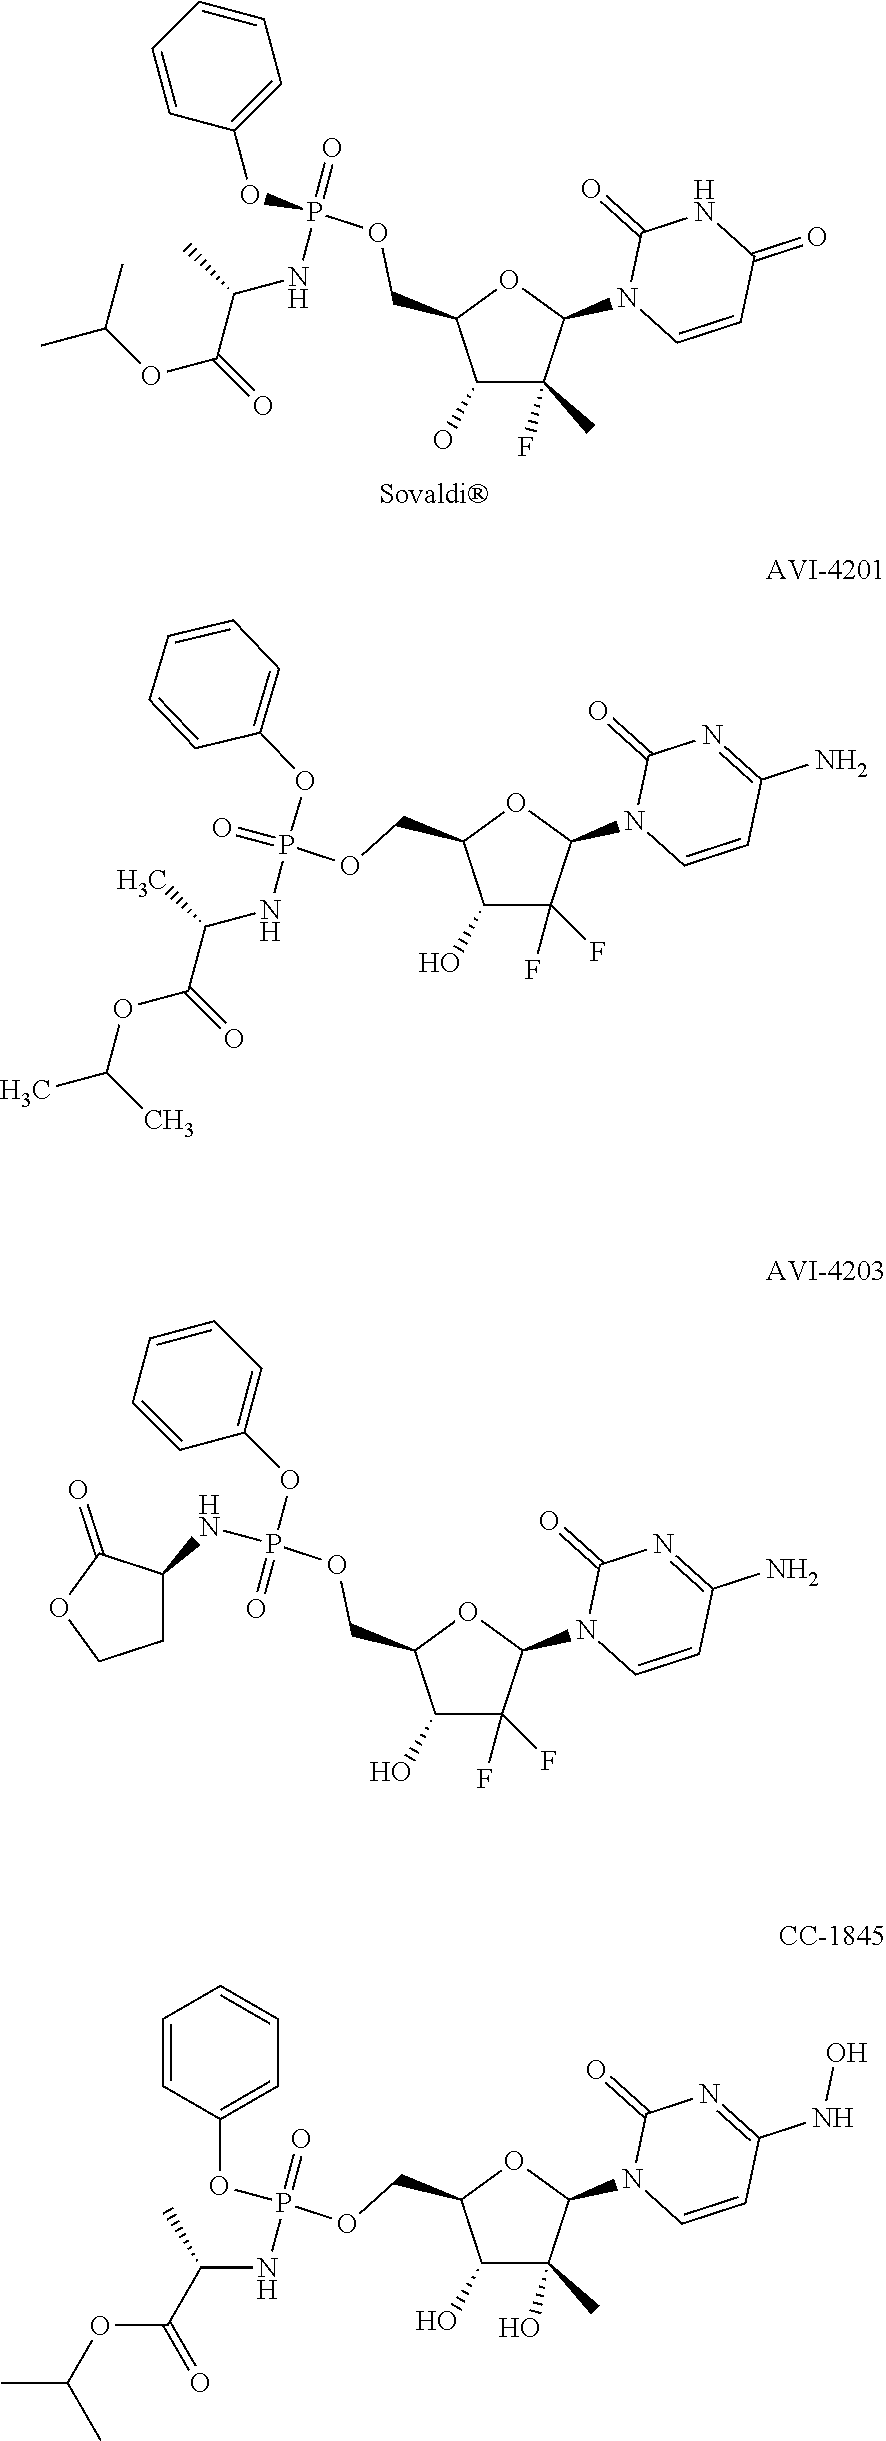 Macroheterocyclic nucleoside derivatives and their analogues, production and use thereof